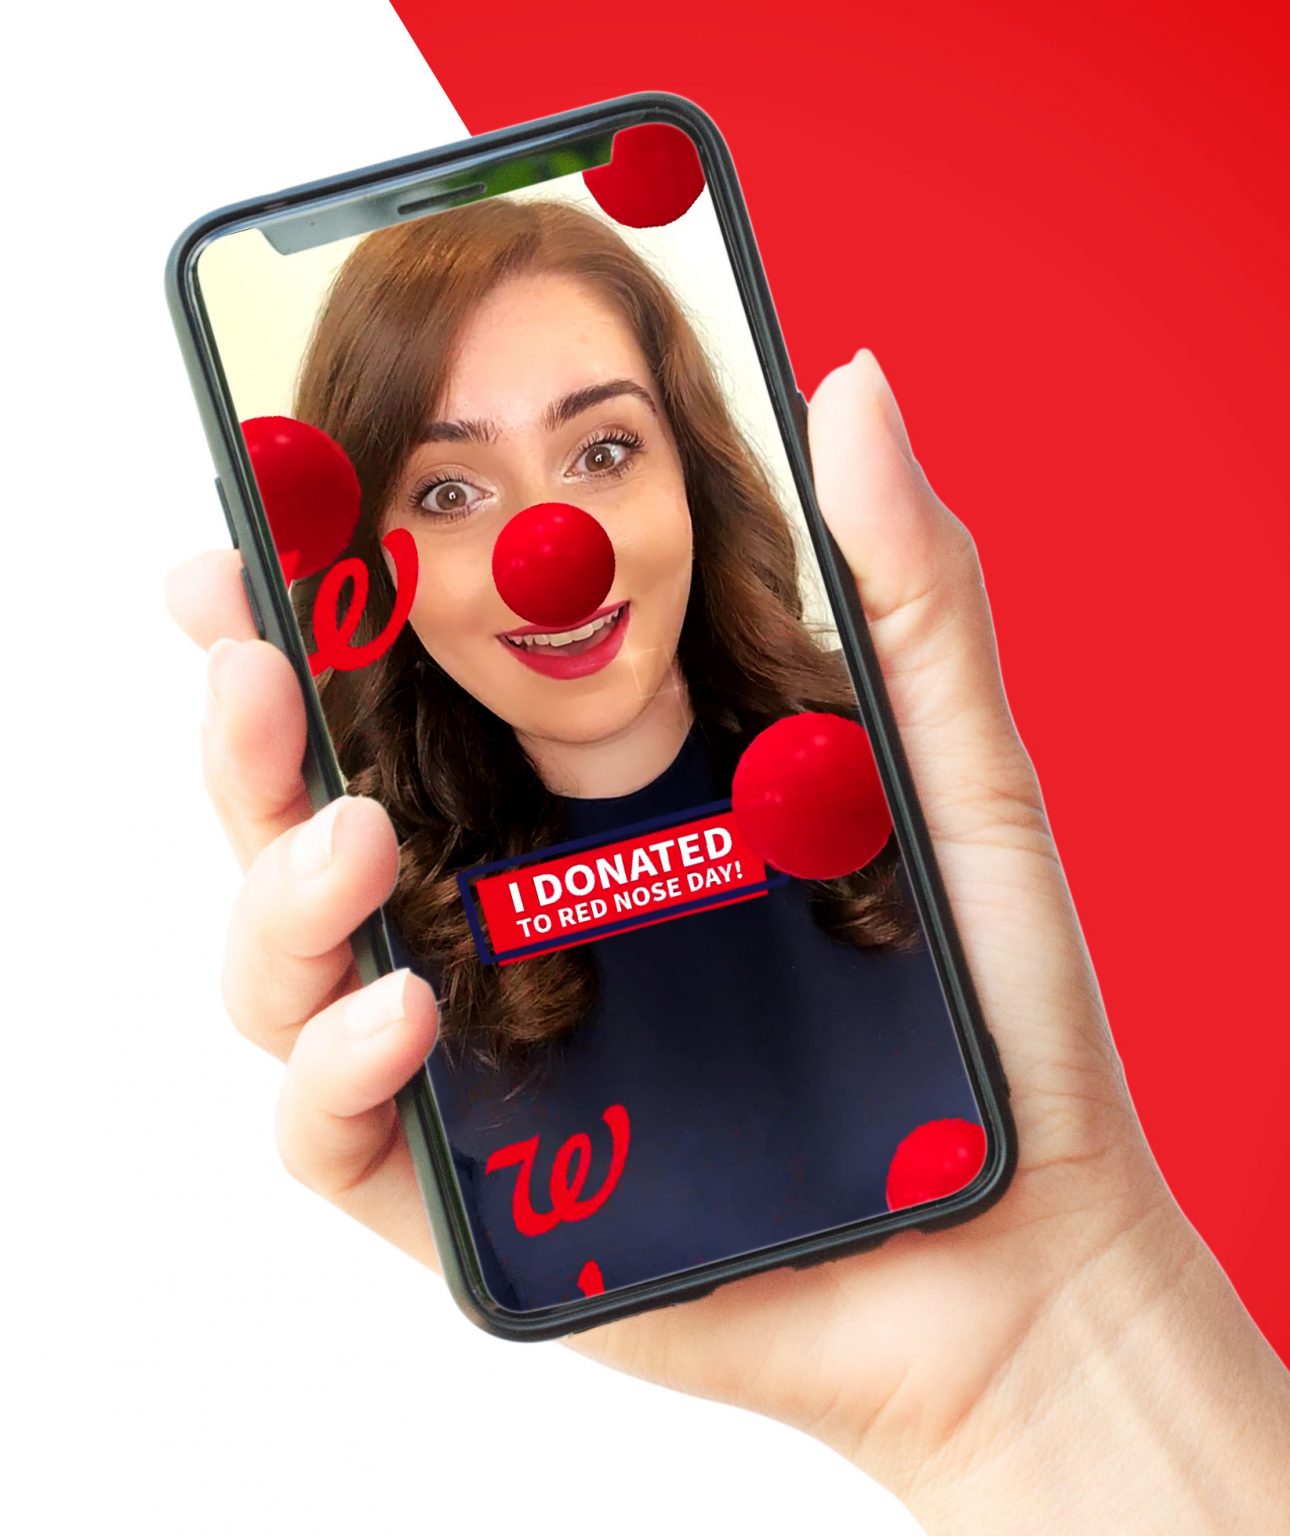 Walgreens launches 2021 Red Nose Day campaign CDR Chain Drug Review